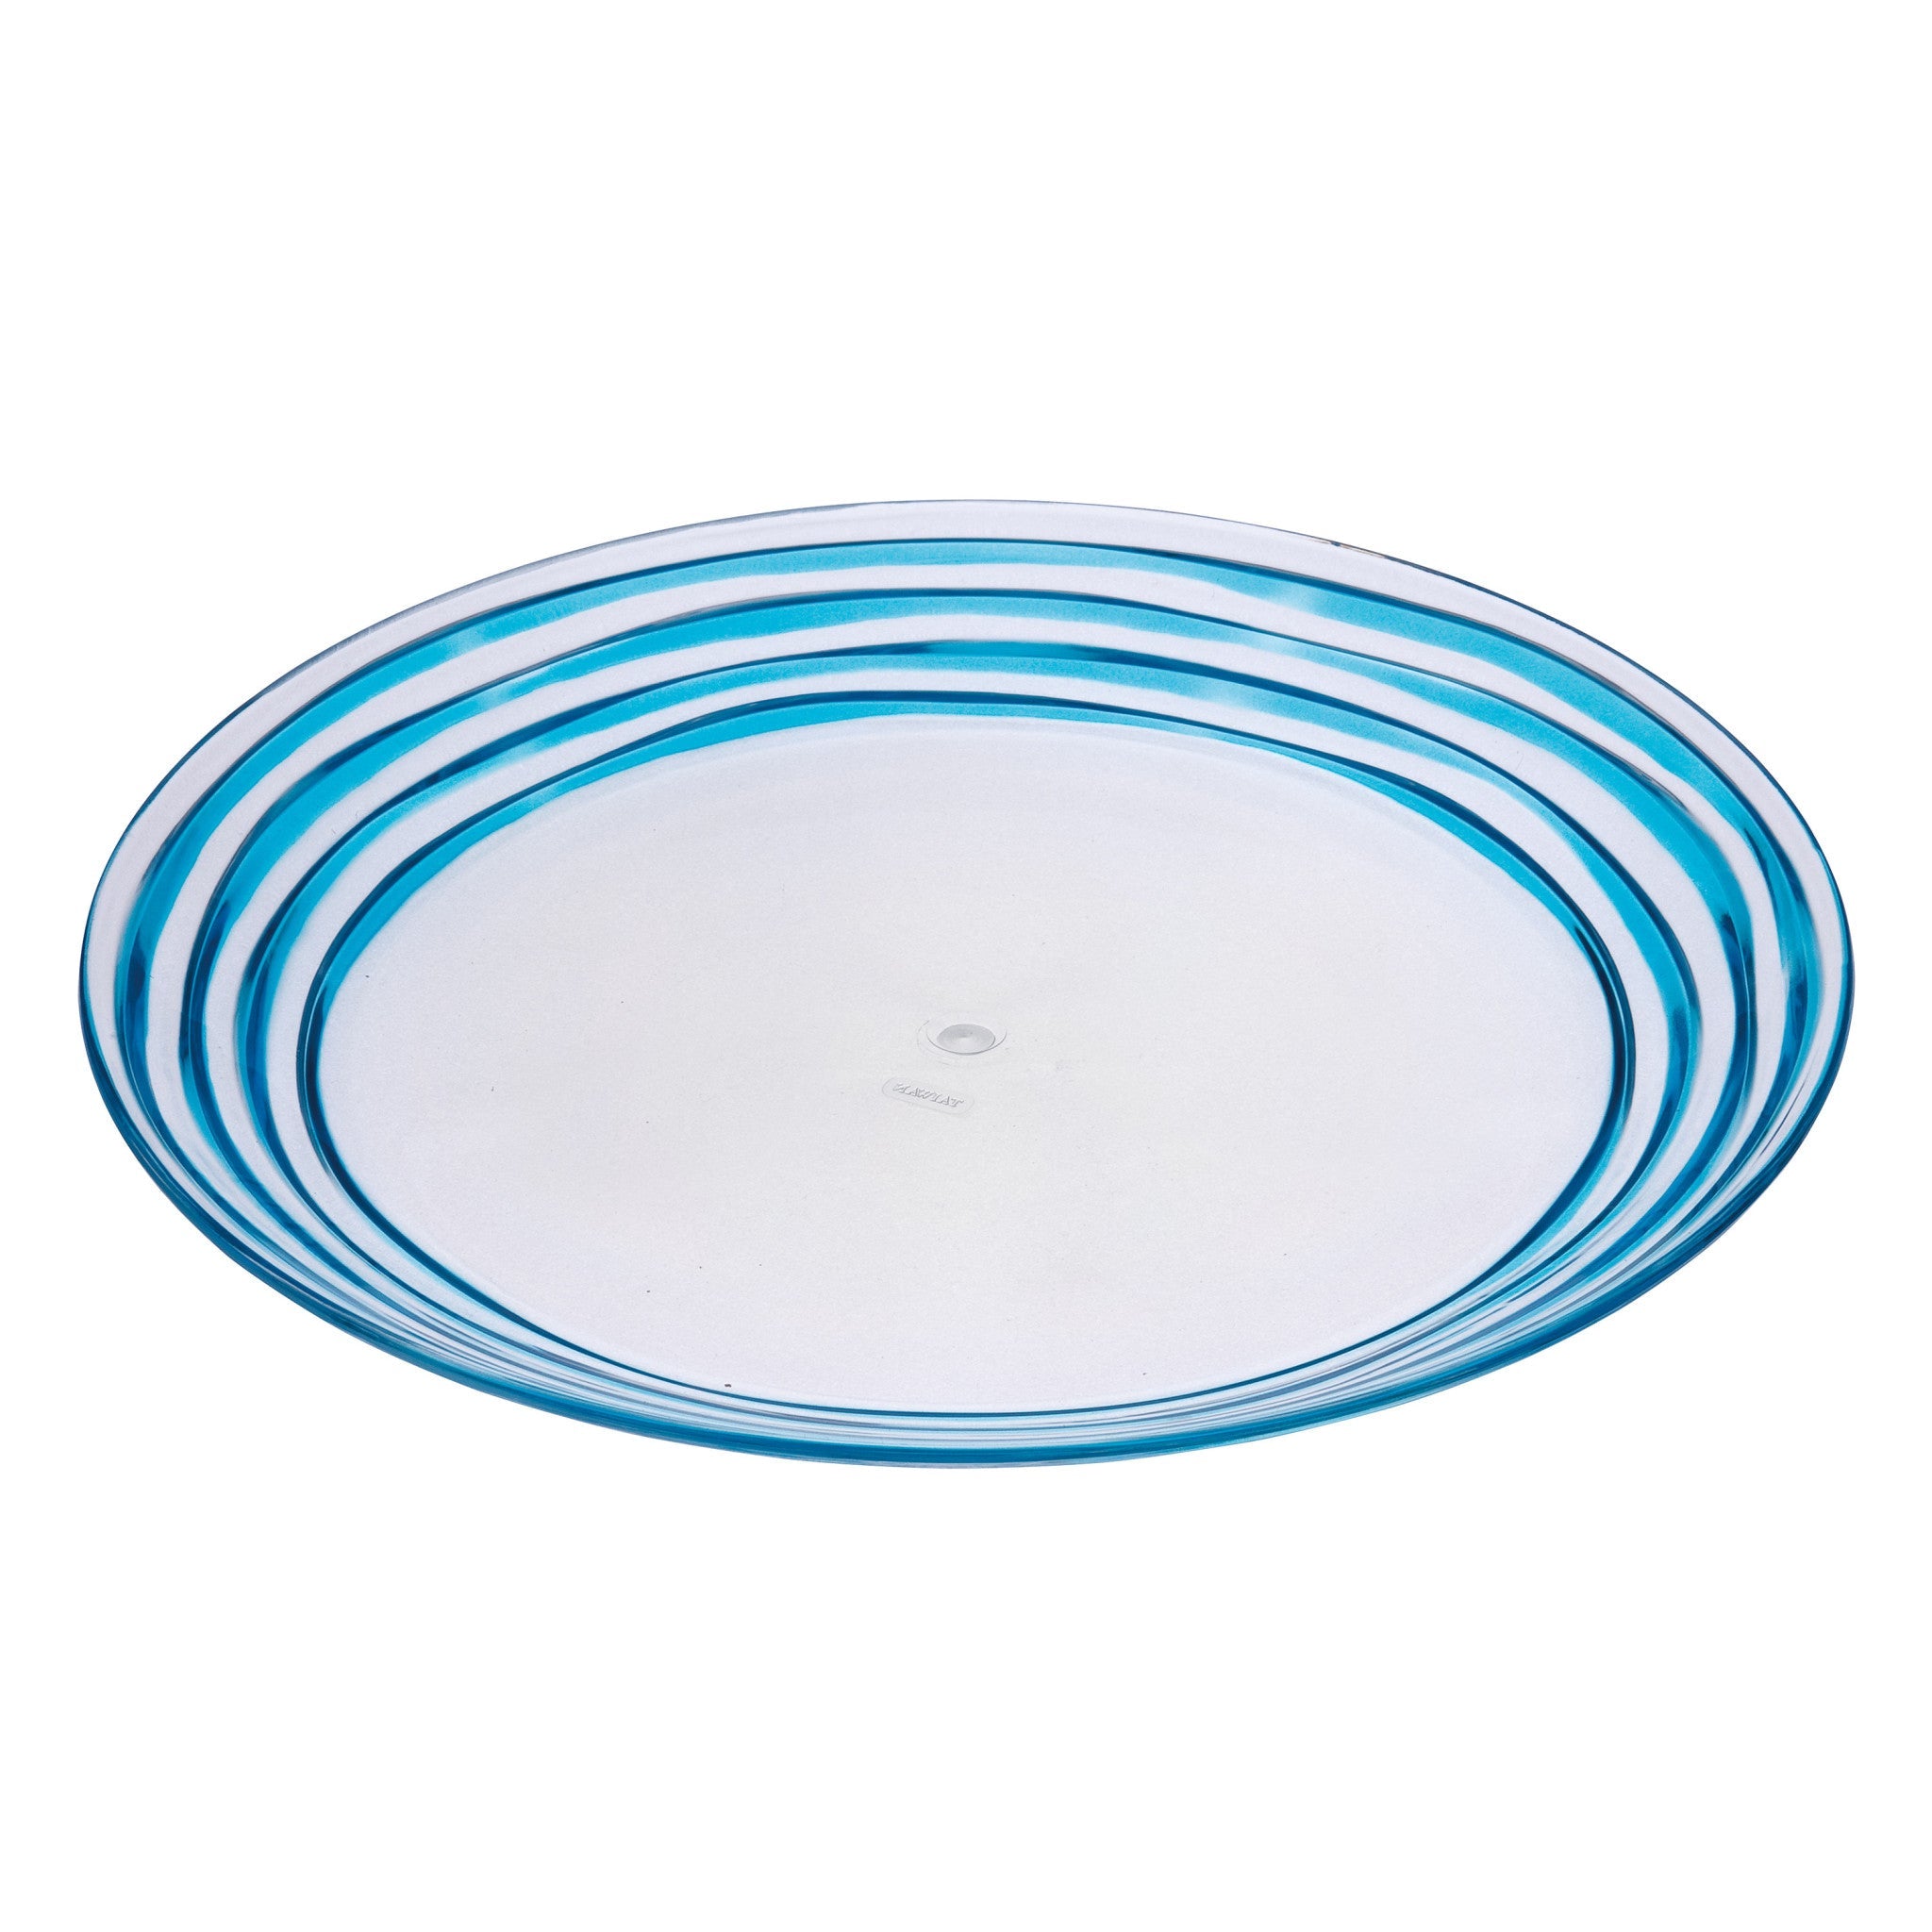 Clear-and-Blue-Four-Piece-Swirl-Acrylic-Service-For-Four-Dinner-Plate-Set-Dinnerware-Sets